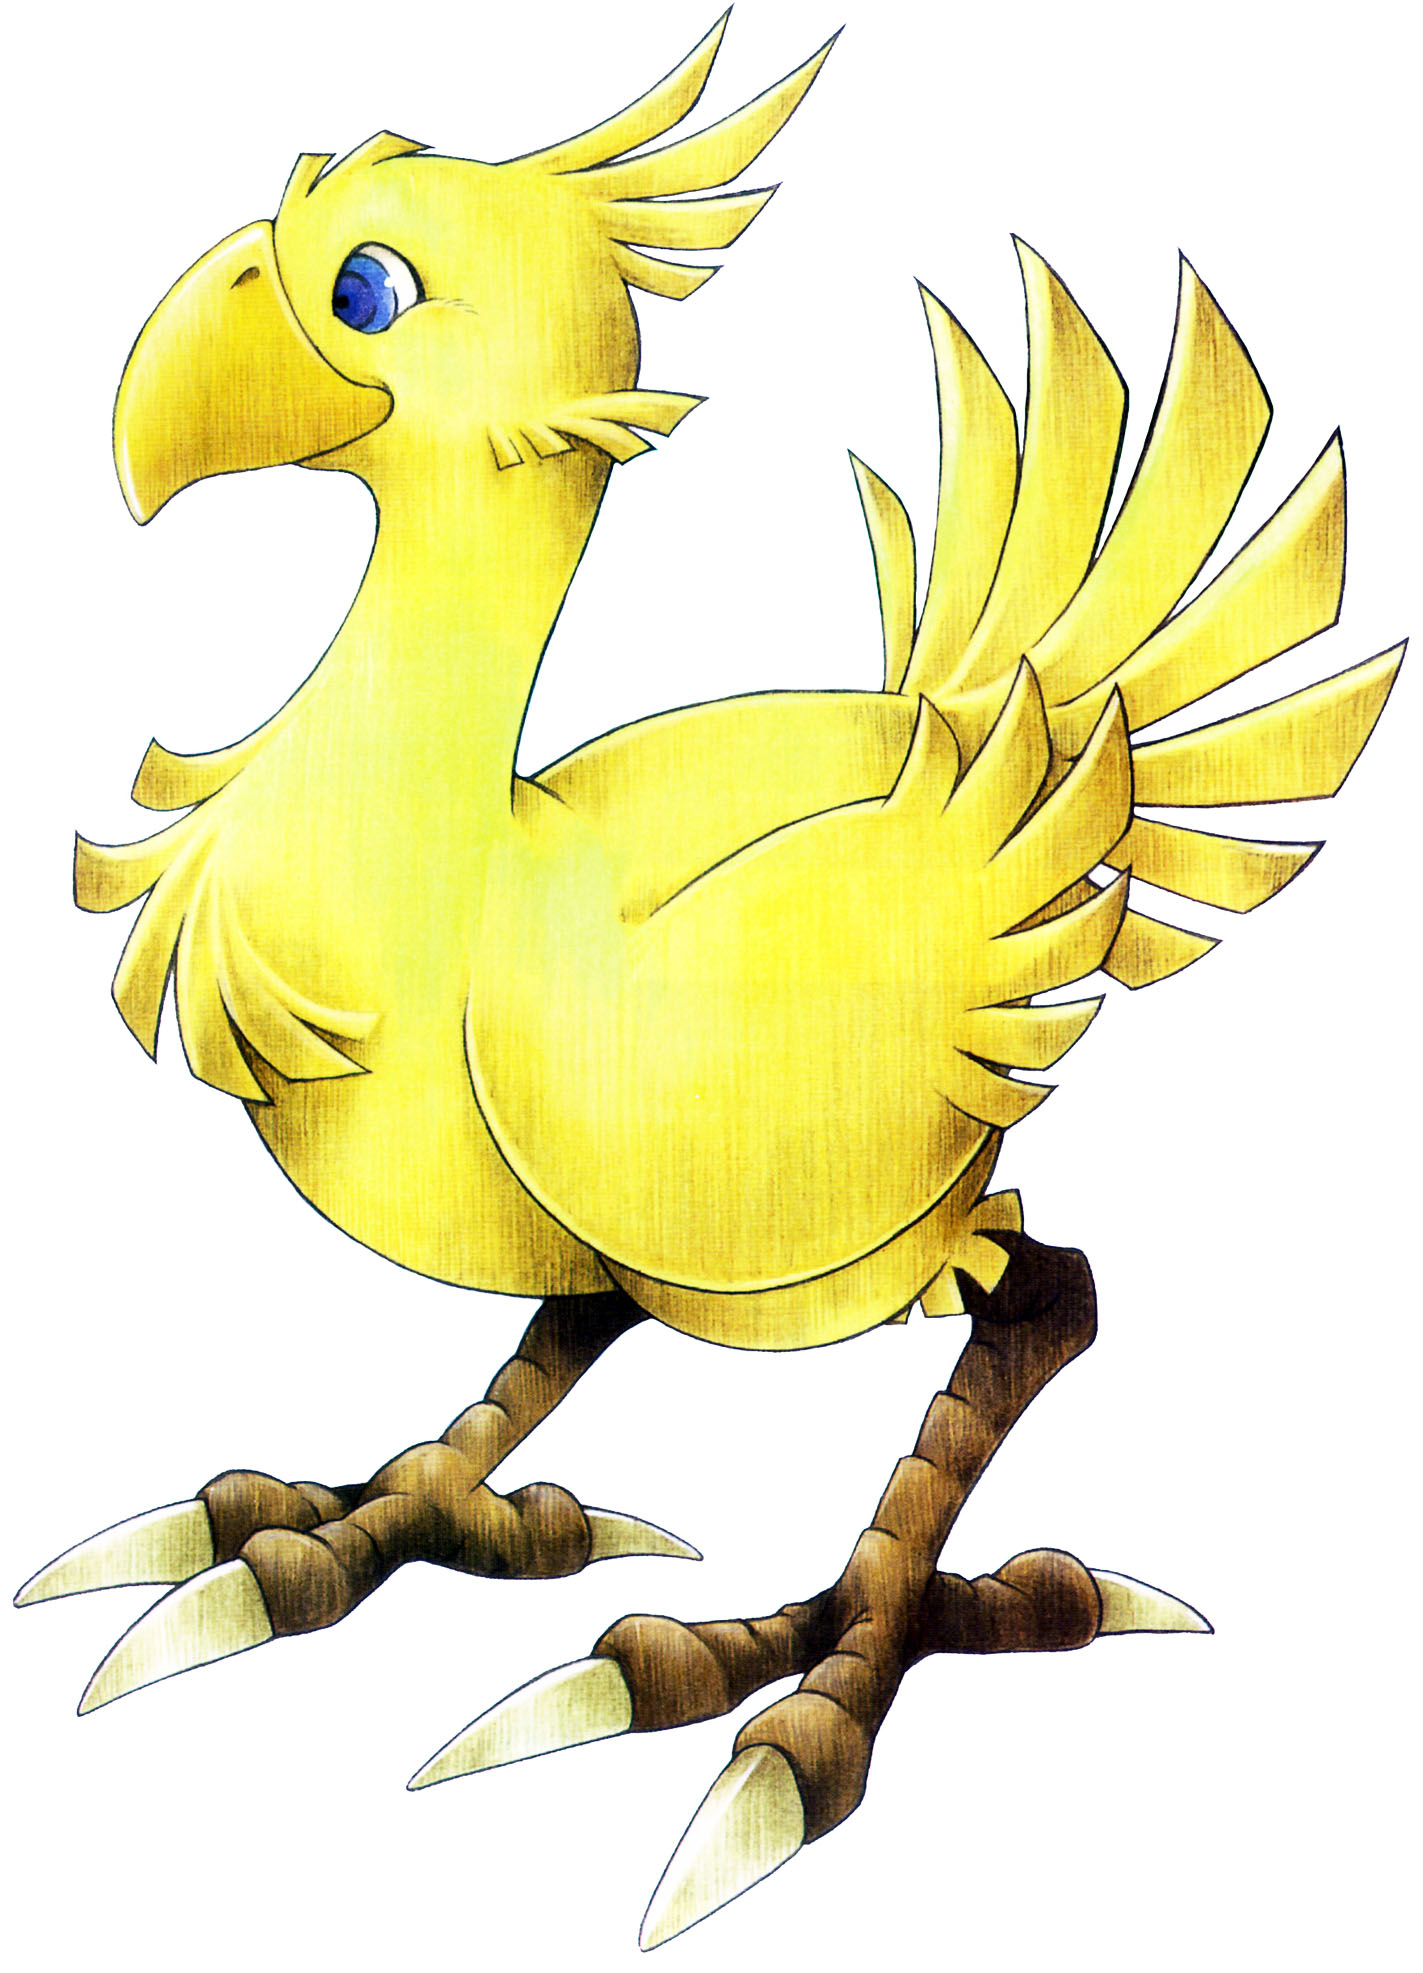 The Chocobos From Final Fantasy Series Game Art.